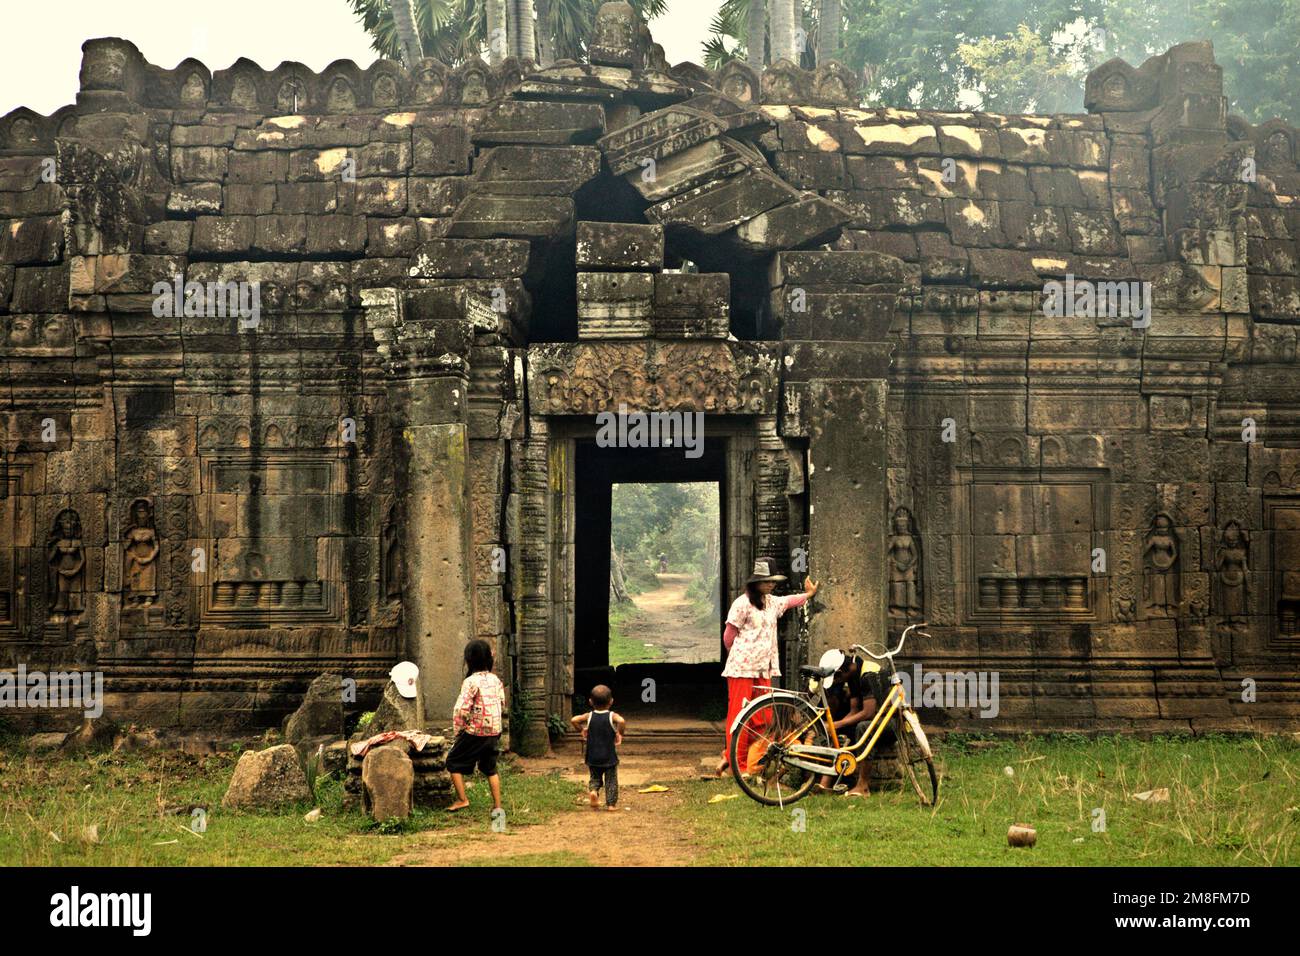 A local family having leisure time at Banteay Prei Nokor temple, a cultural heritage that is archaeologically dated back to the 11th century, located in Kompong Cham (Kampong Cham), Cambodia. The temple is rarely visited by tourist. 'The sustainability of cultural heritage resources is strongly linked to the effective participation of local communities in the conservation and management of these resources,' wrote a team of scientists led by Sunday Oladipo Oladeji in the abstract of their paper published on Sage Journals on Oct 28, 2022. Stock Photo